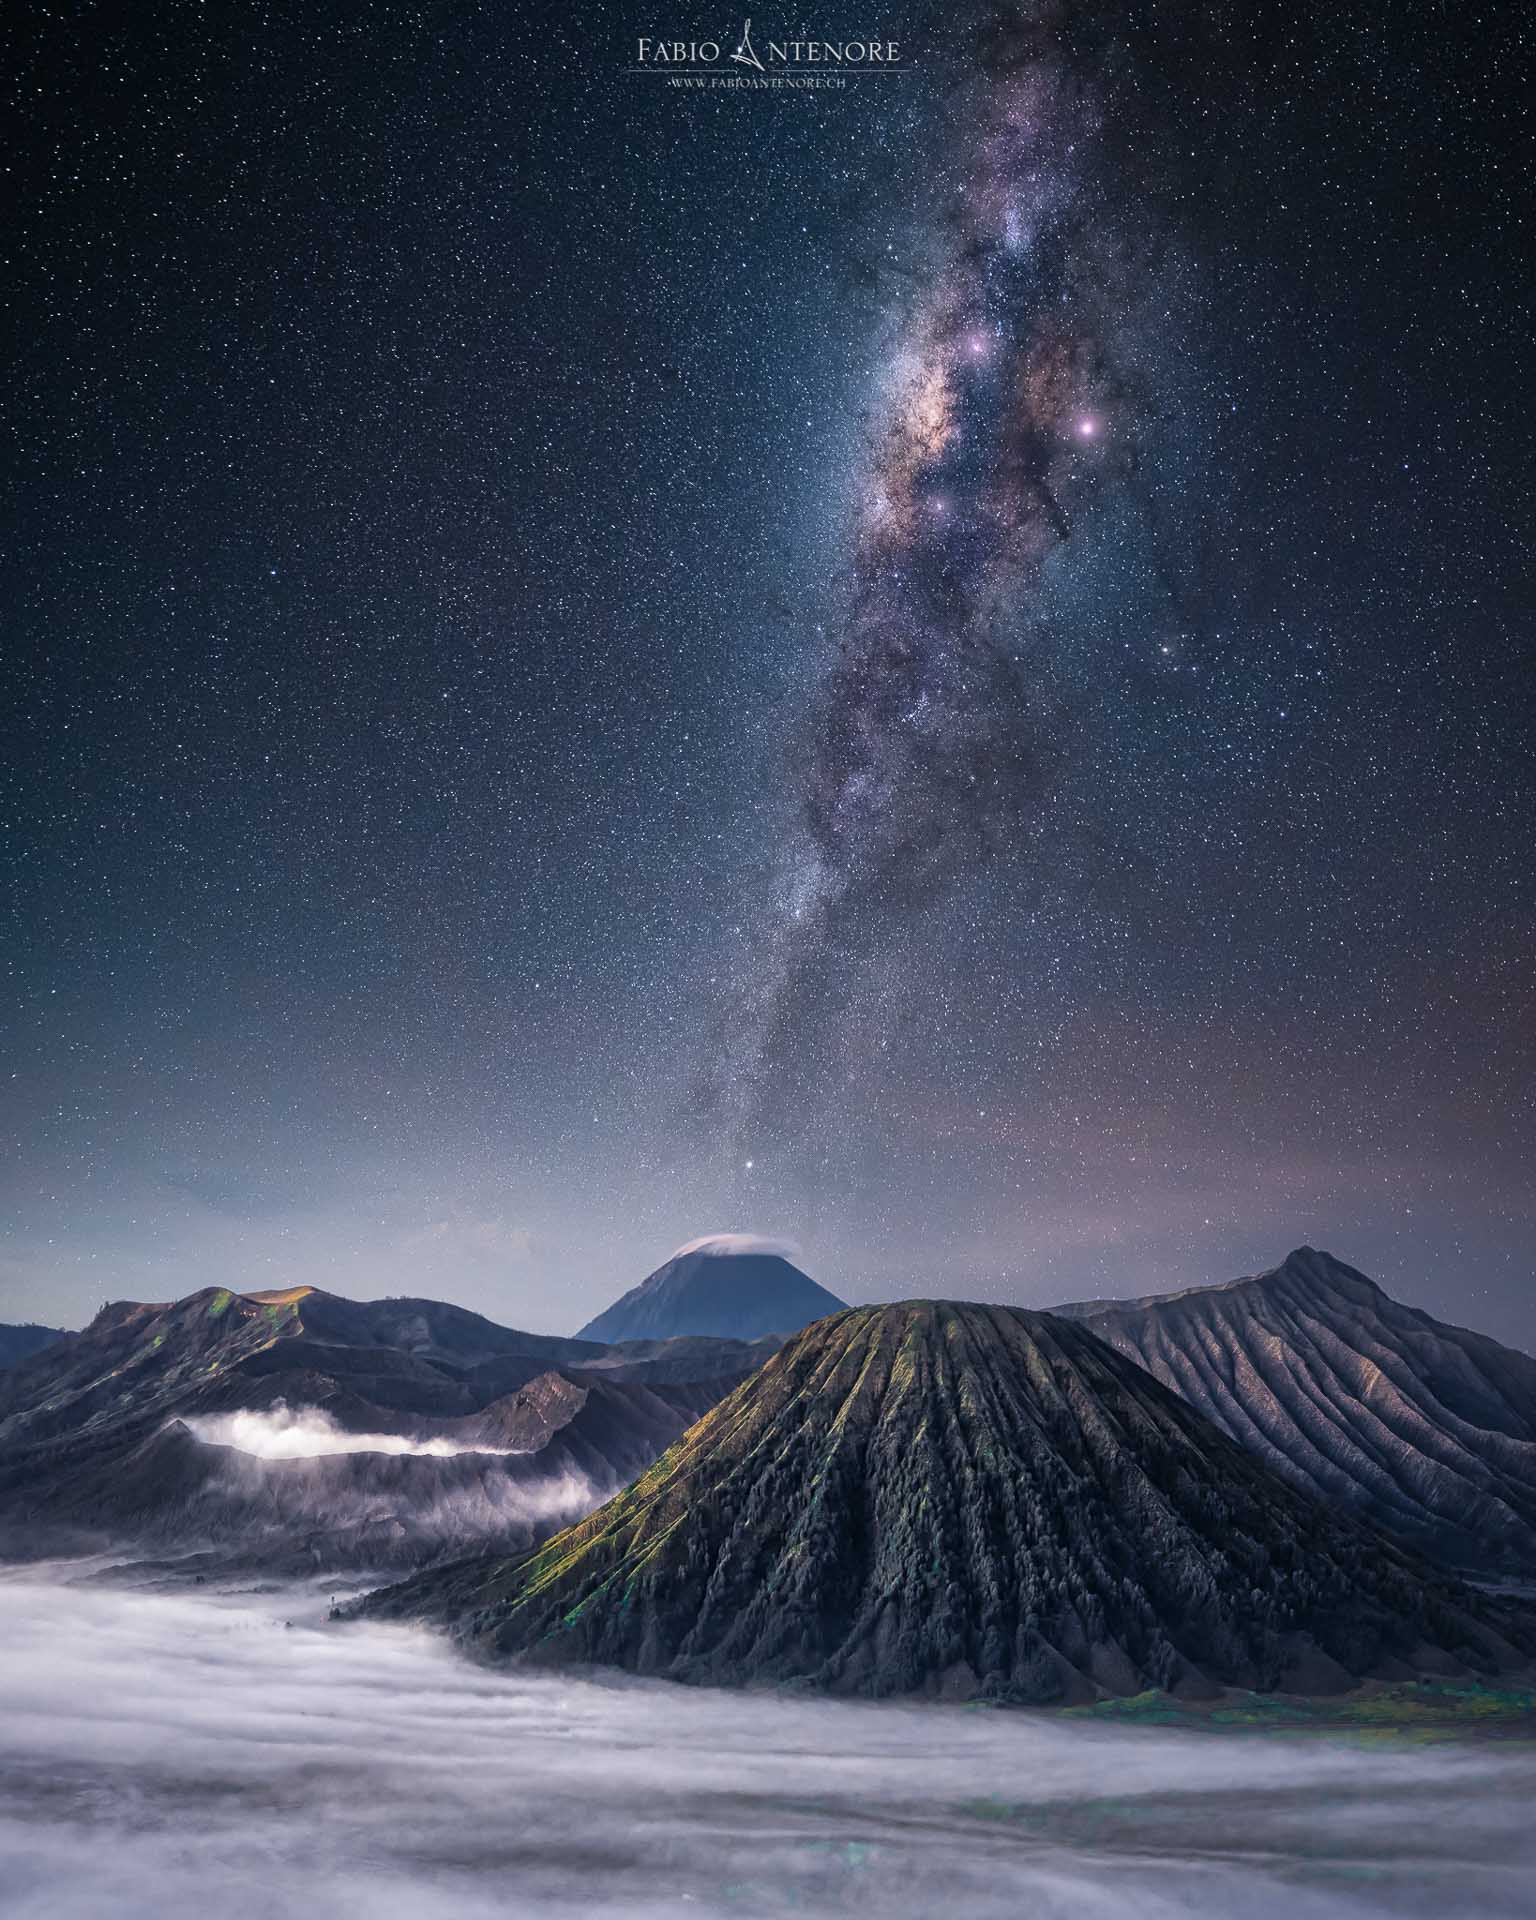 Best places to see the Milky Way in Asia